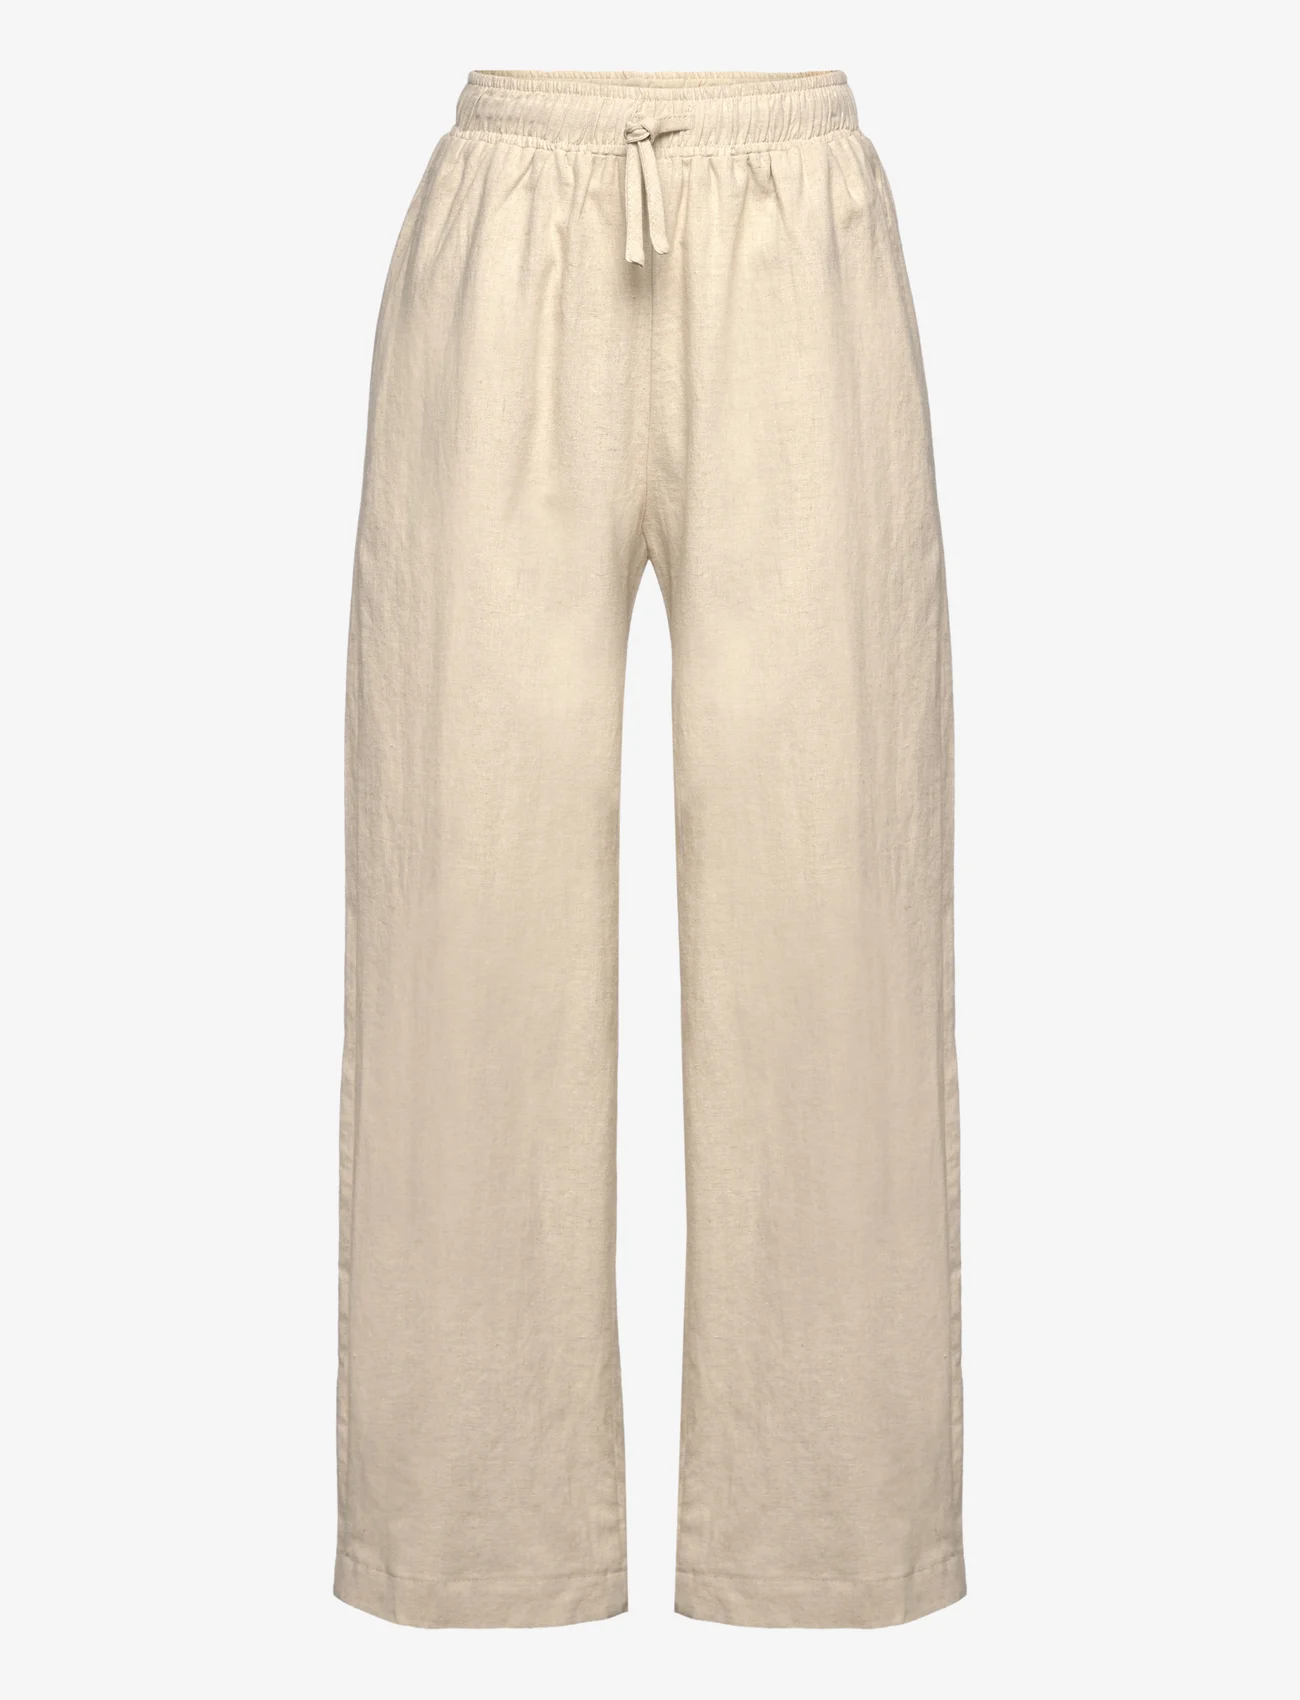 Sofie Schnoor Young - Trousers - linnen - light sand - 0